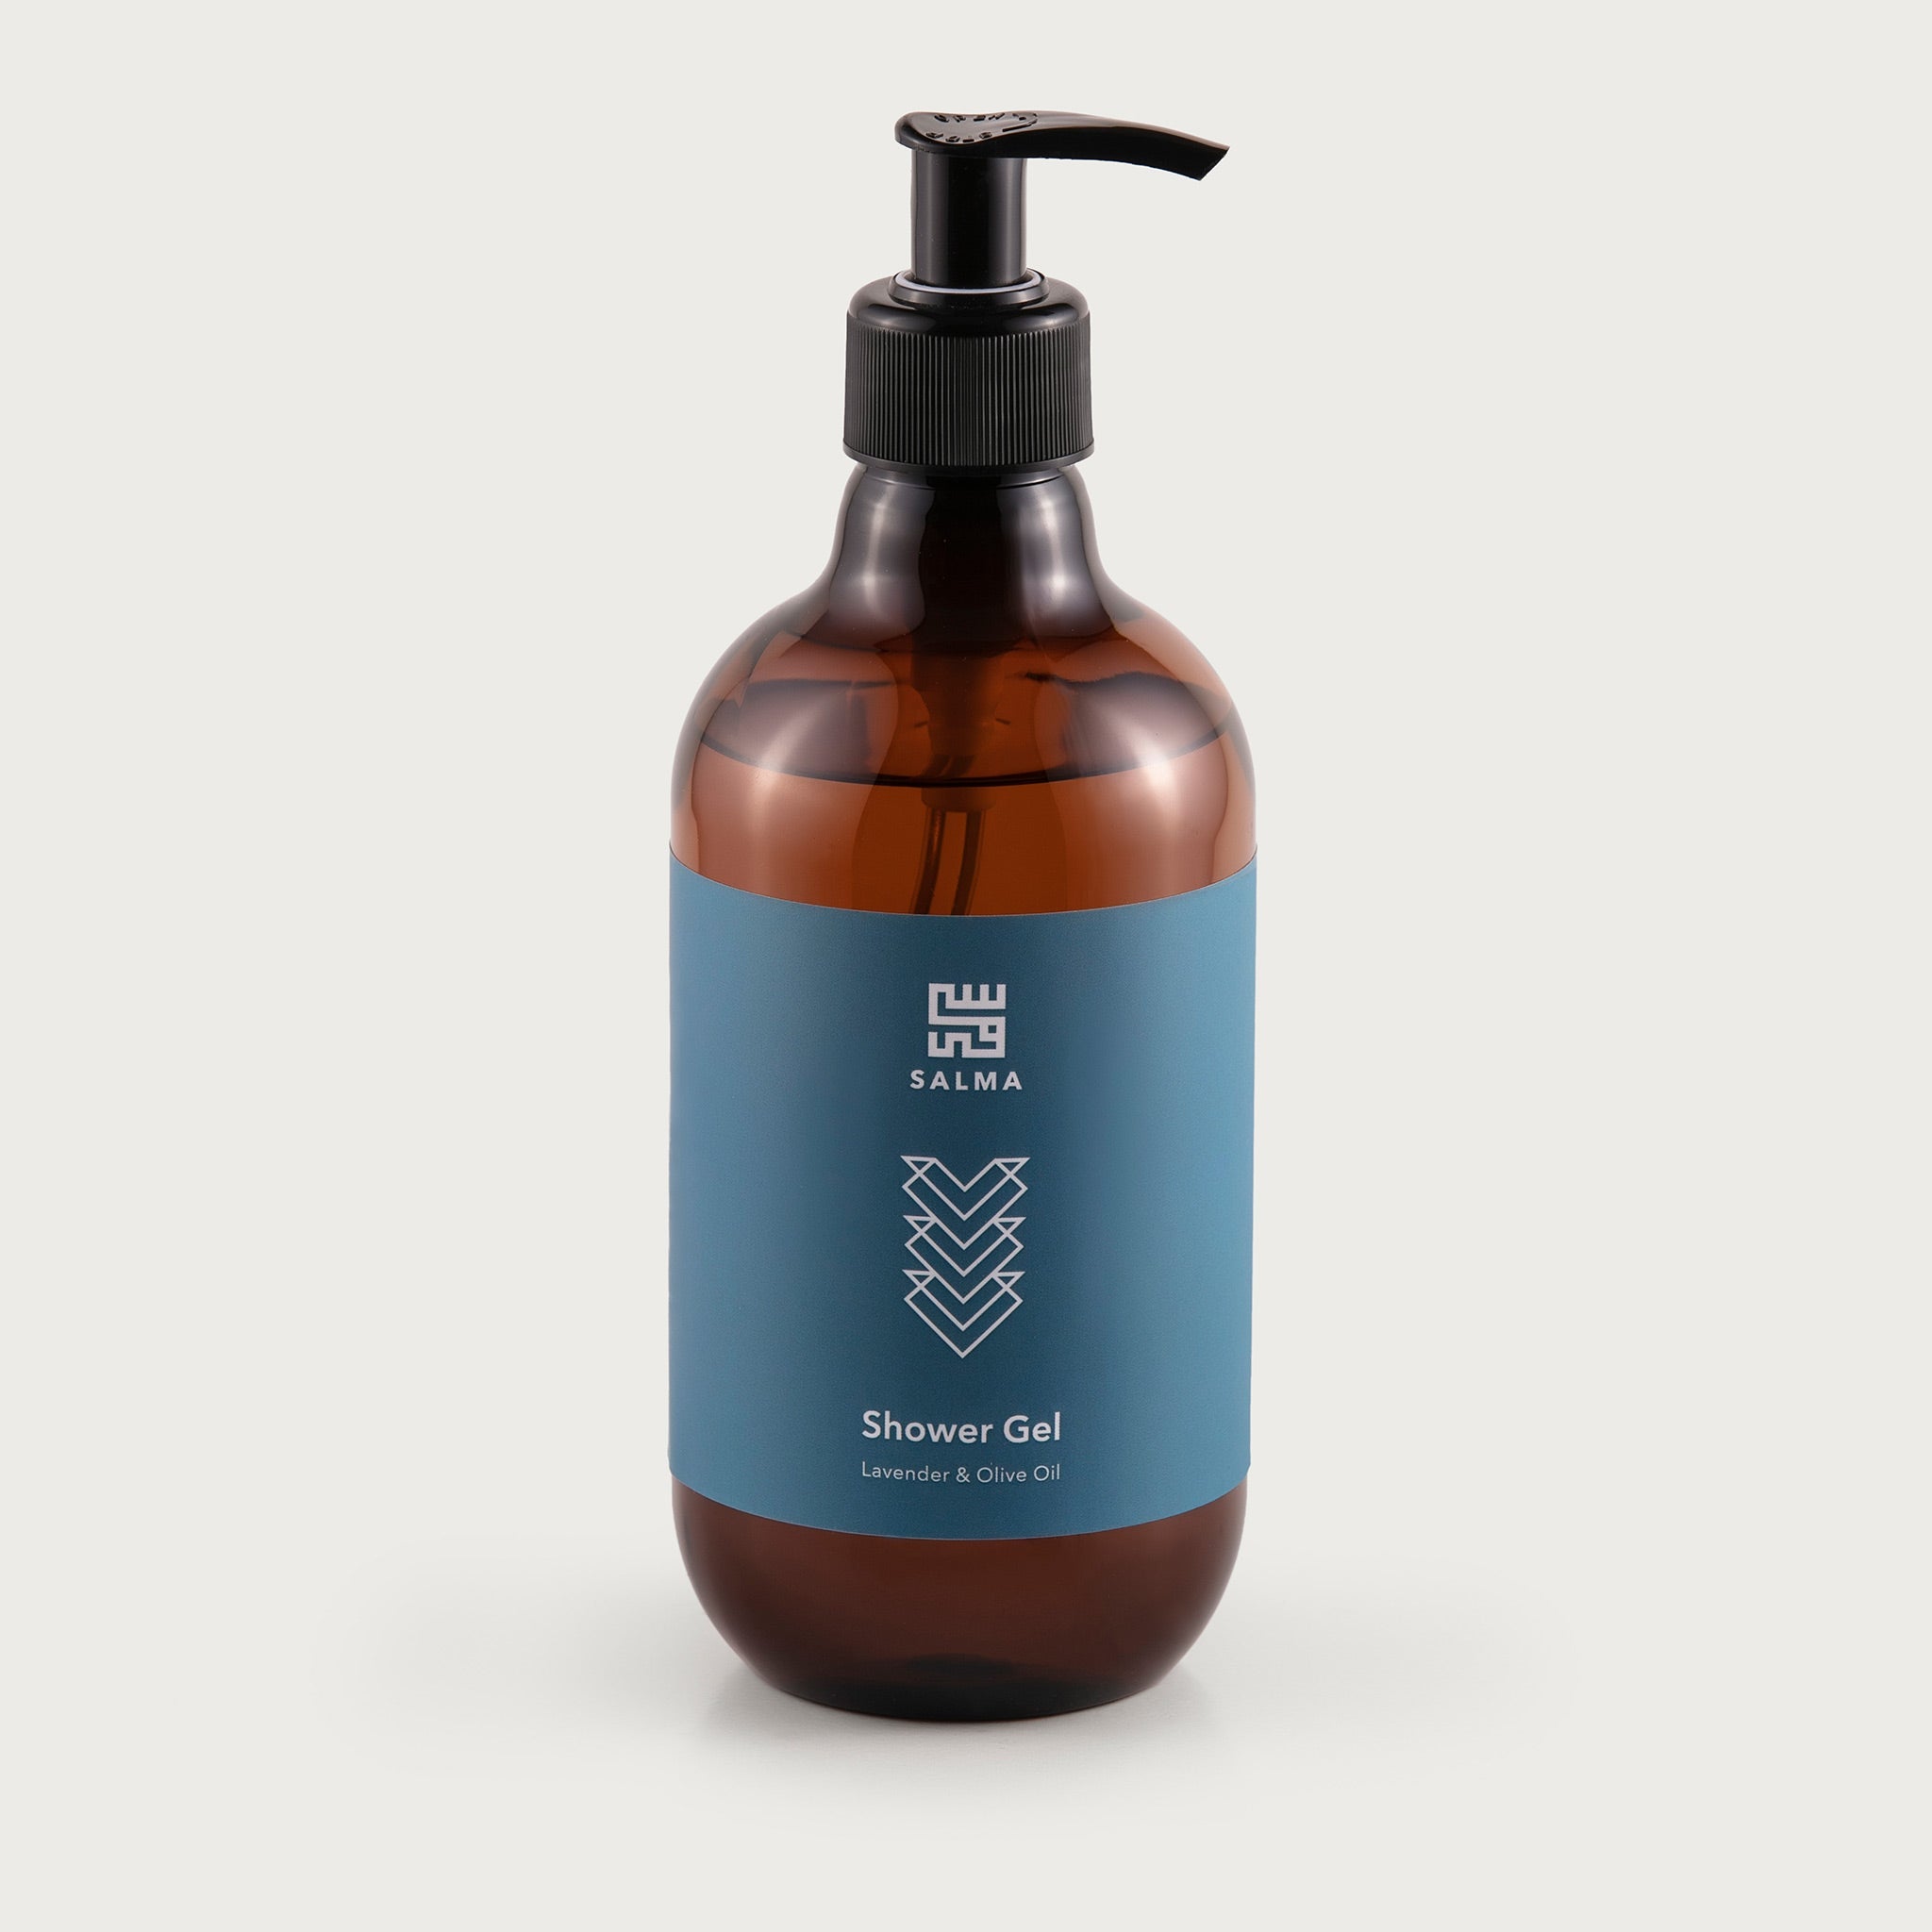 This pump top bottle is amber in color so you can see the shower gel inside. The label is a beautiful blue color with the white Salma logo and the lavender & olive oil scent notated.